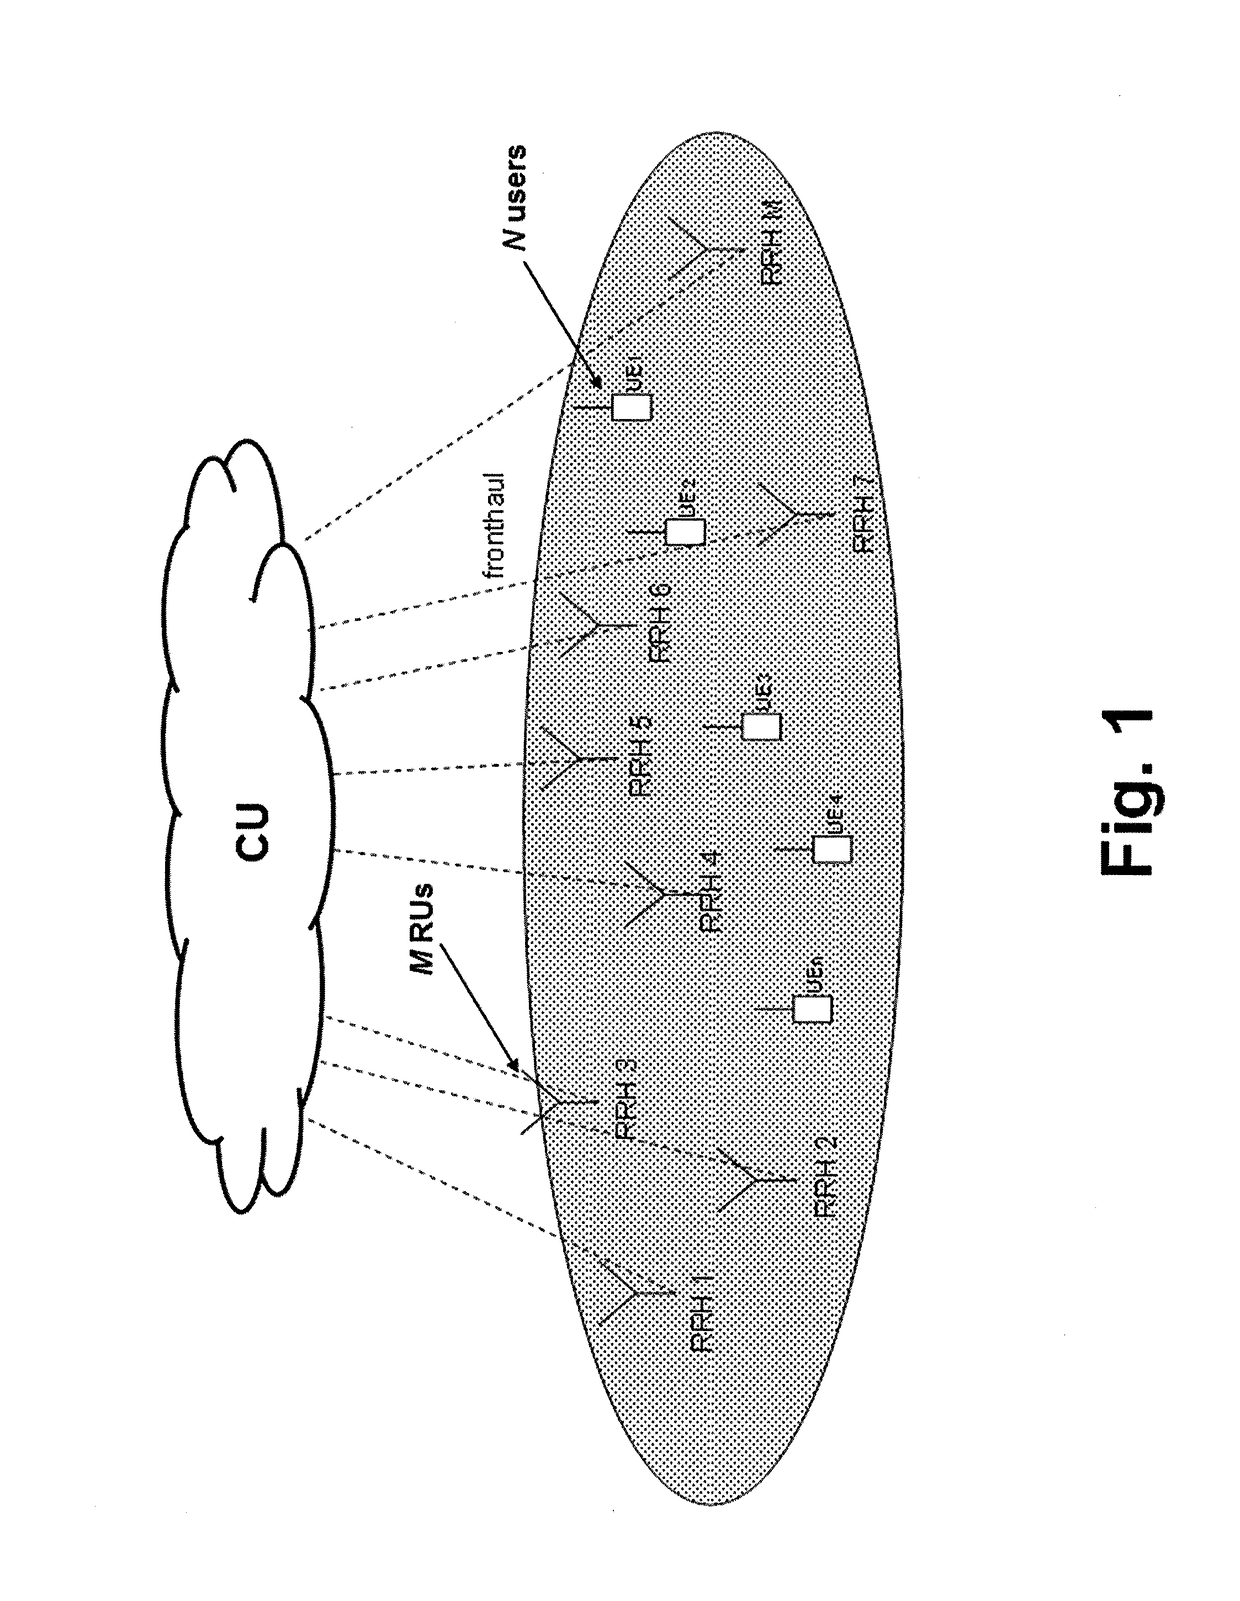 Method to perform joint scheduling in the downlink or in the uplink of a centralized OFDM radio access network for a plurality of users considering time, frequency and space domains, scheduler device thereof and computer program products